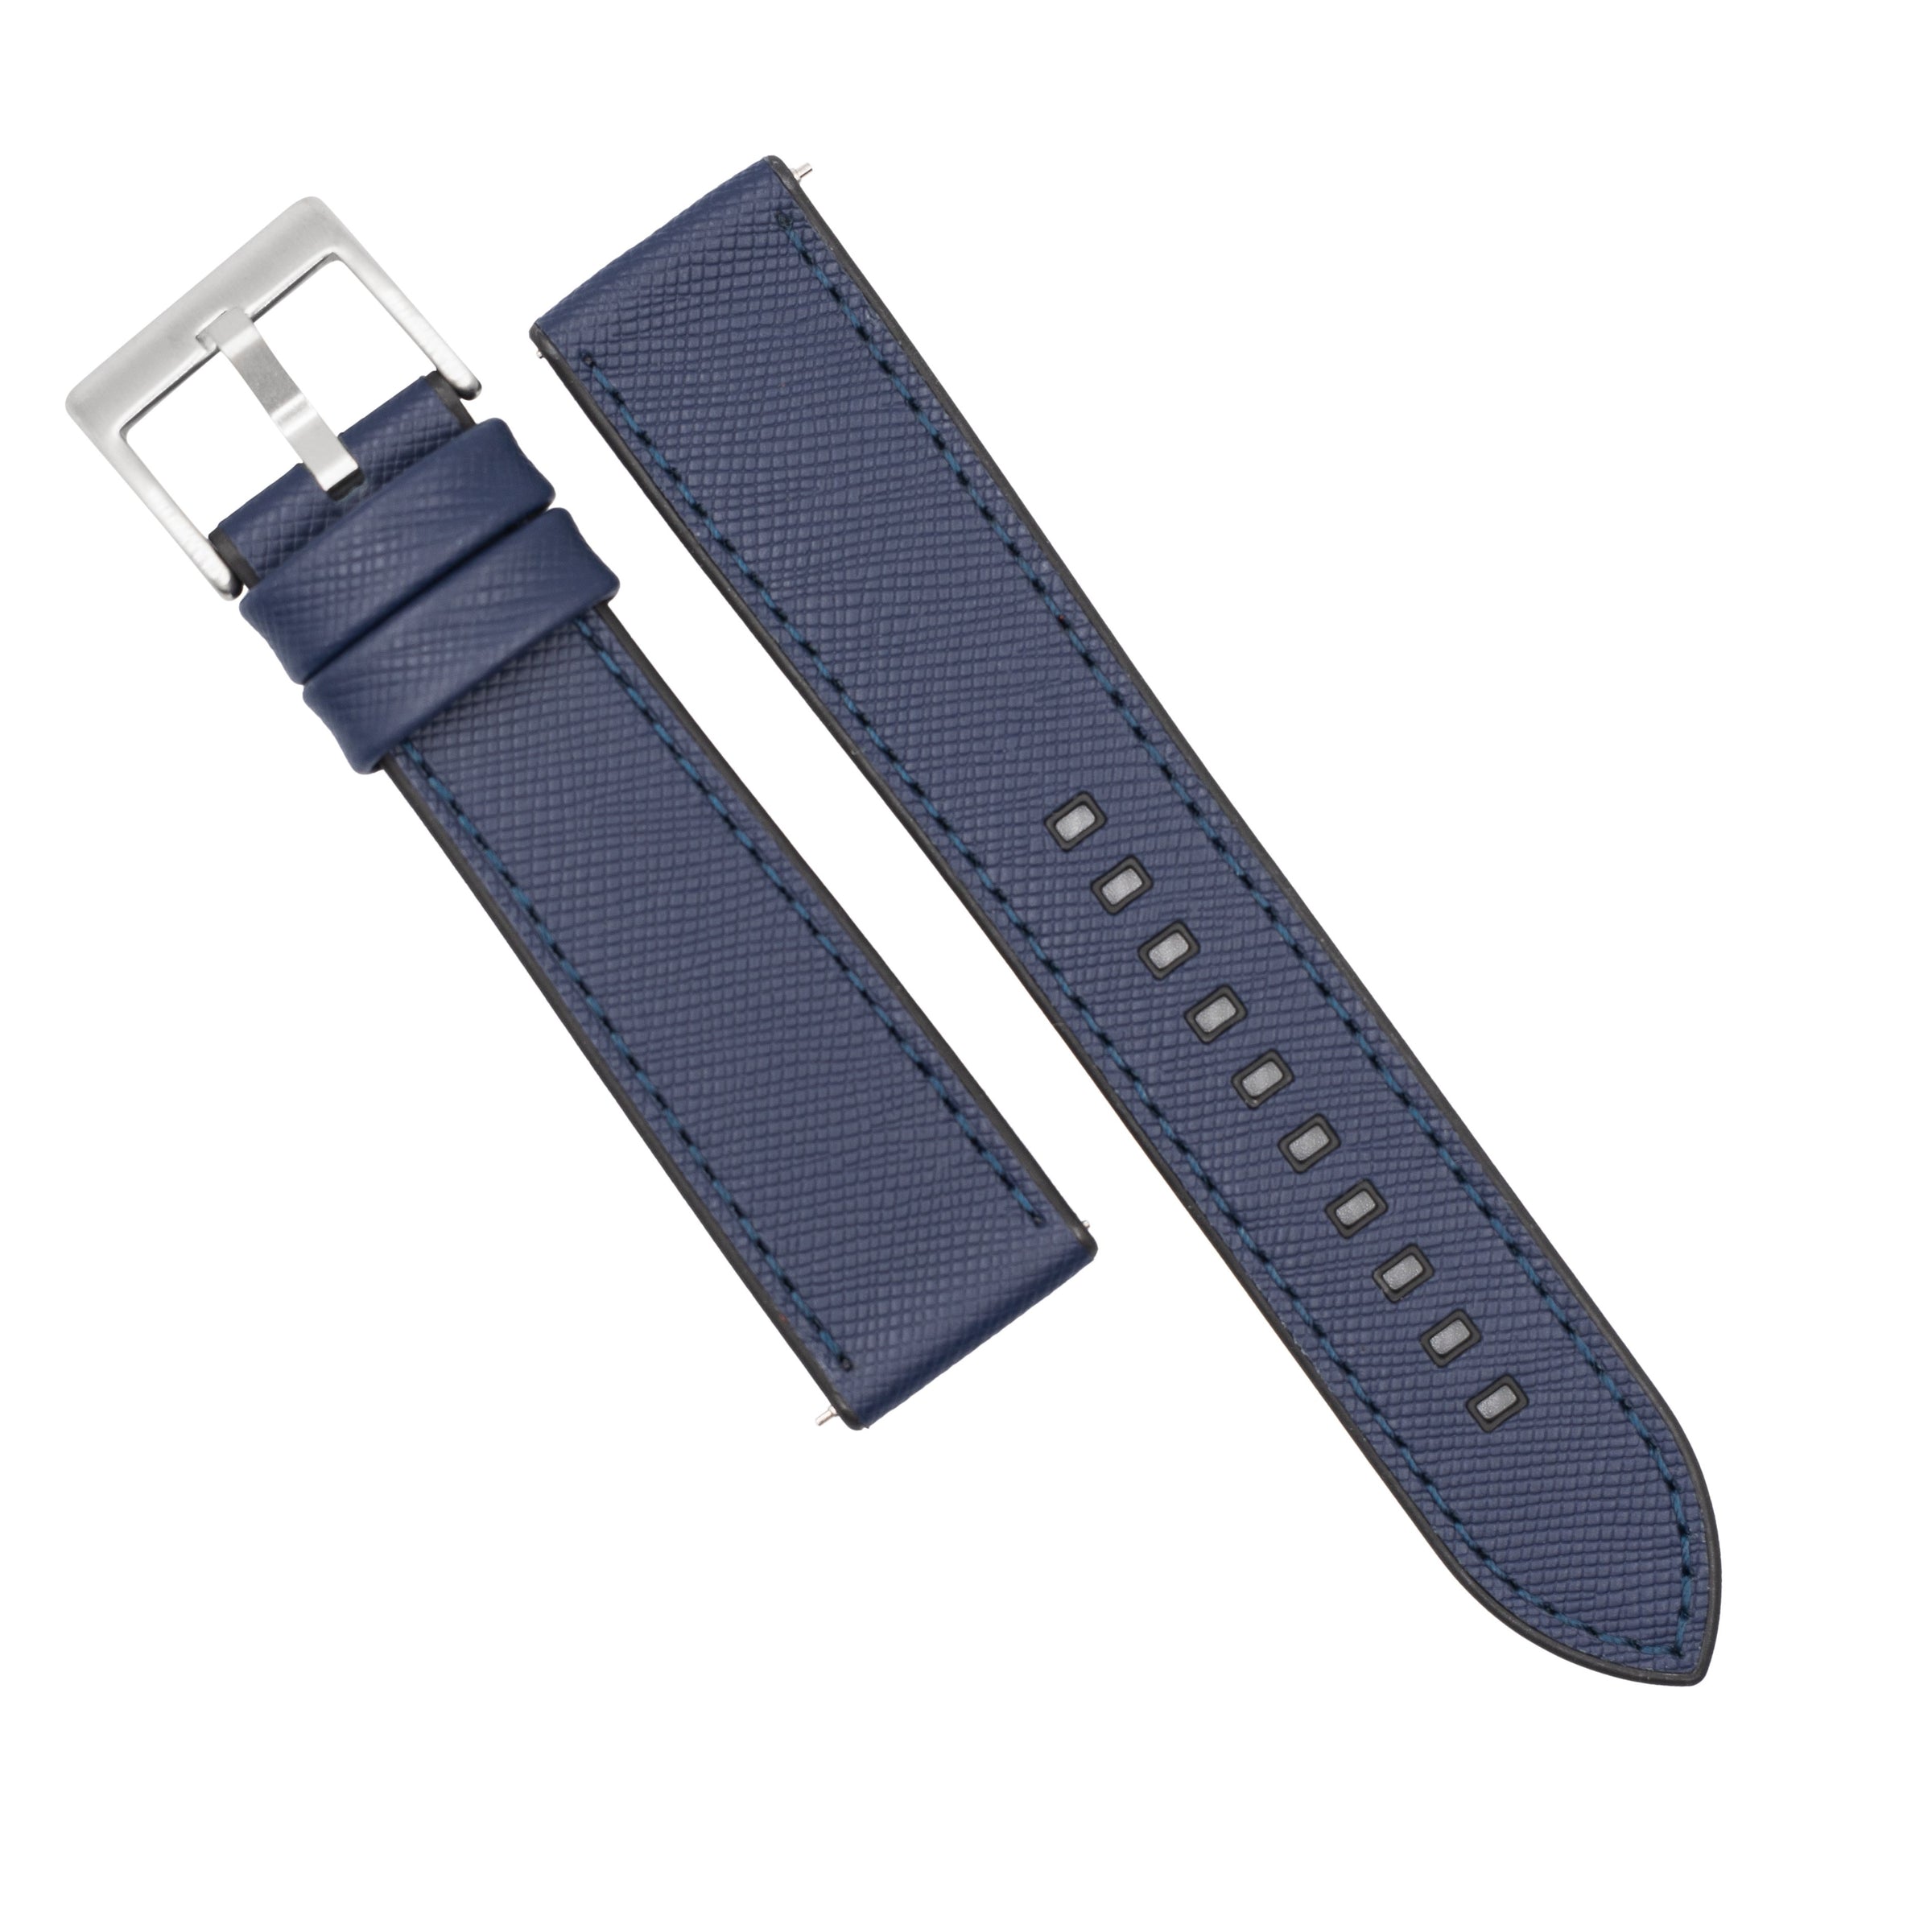 Performax Saffiano Leather FKM Rubber Hybrid Strap in Navy (20mm) - Nomad Watch Works MY